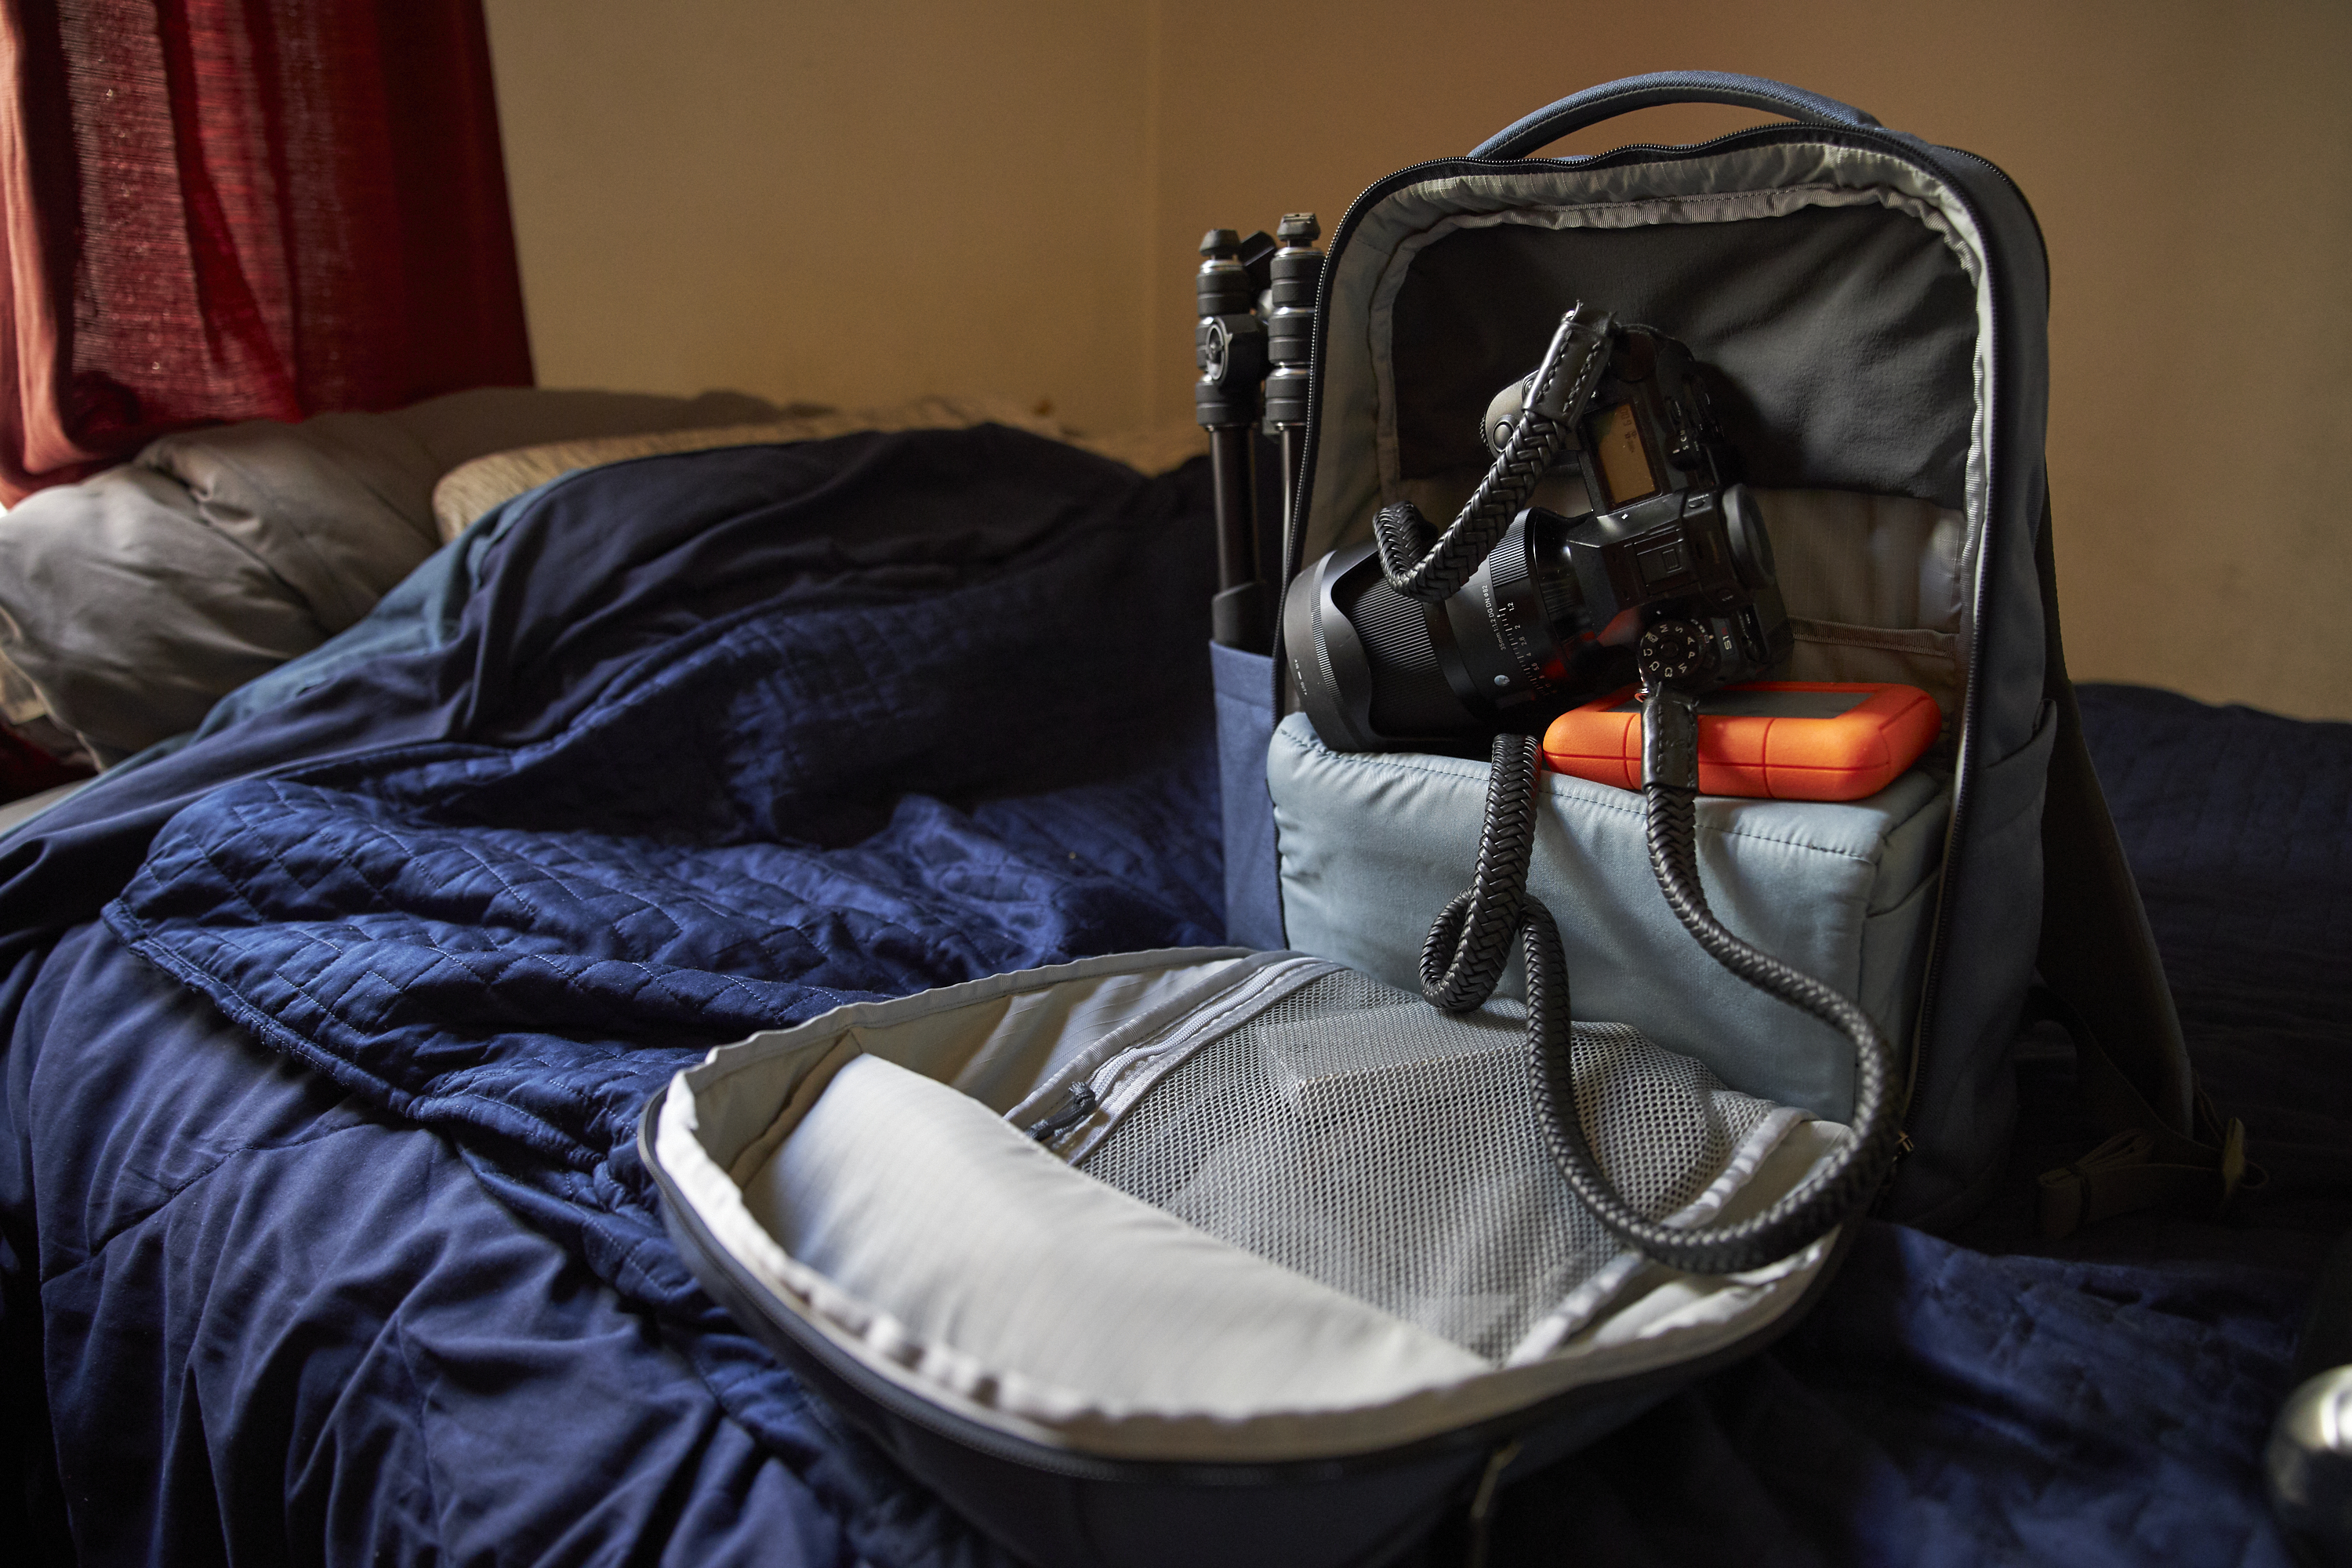 Can the Yeti Crossroads 23 Backpack Work for a Photographer?